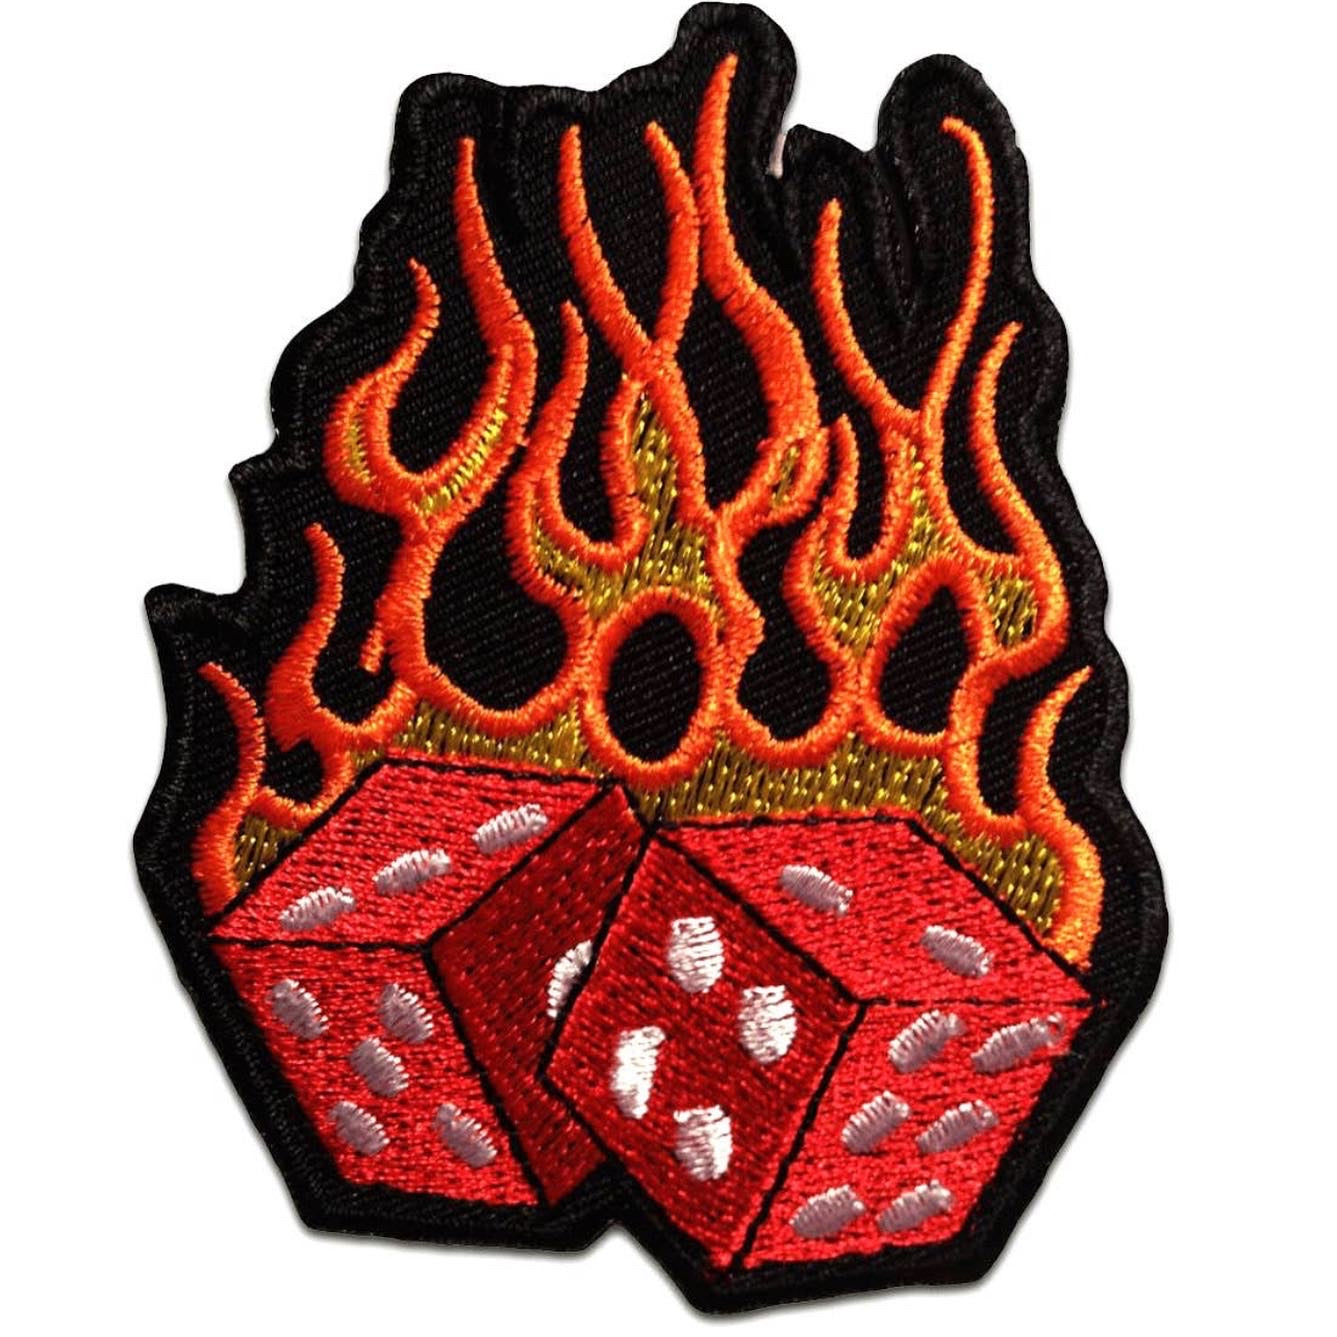 Dice Flames Biker Patch Red